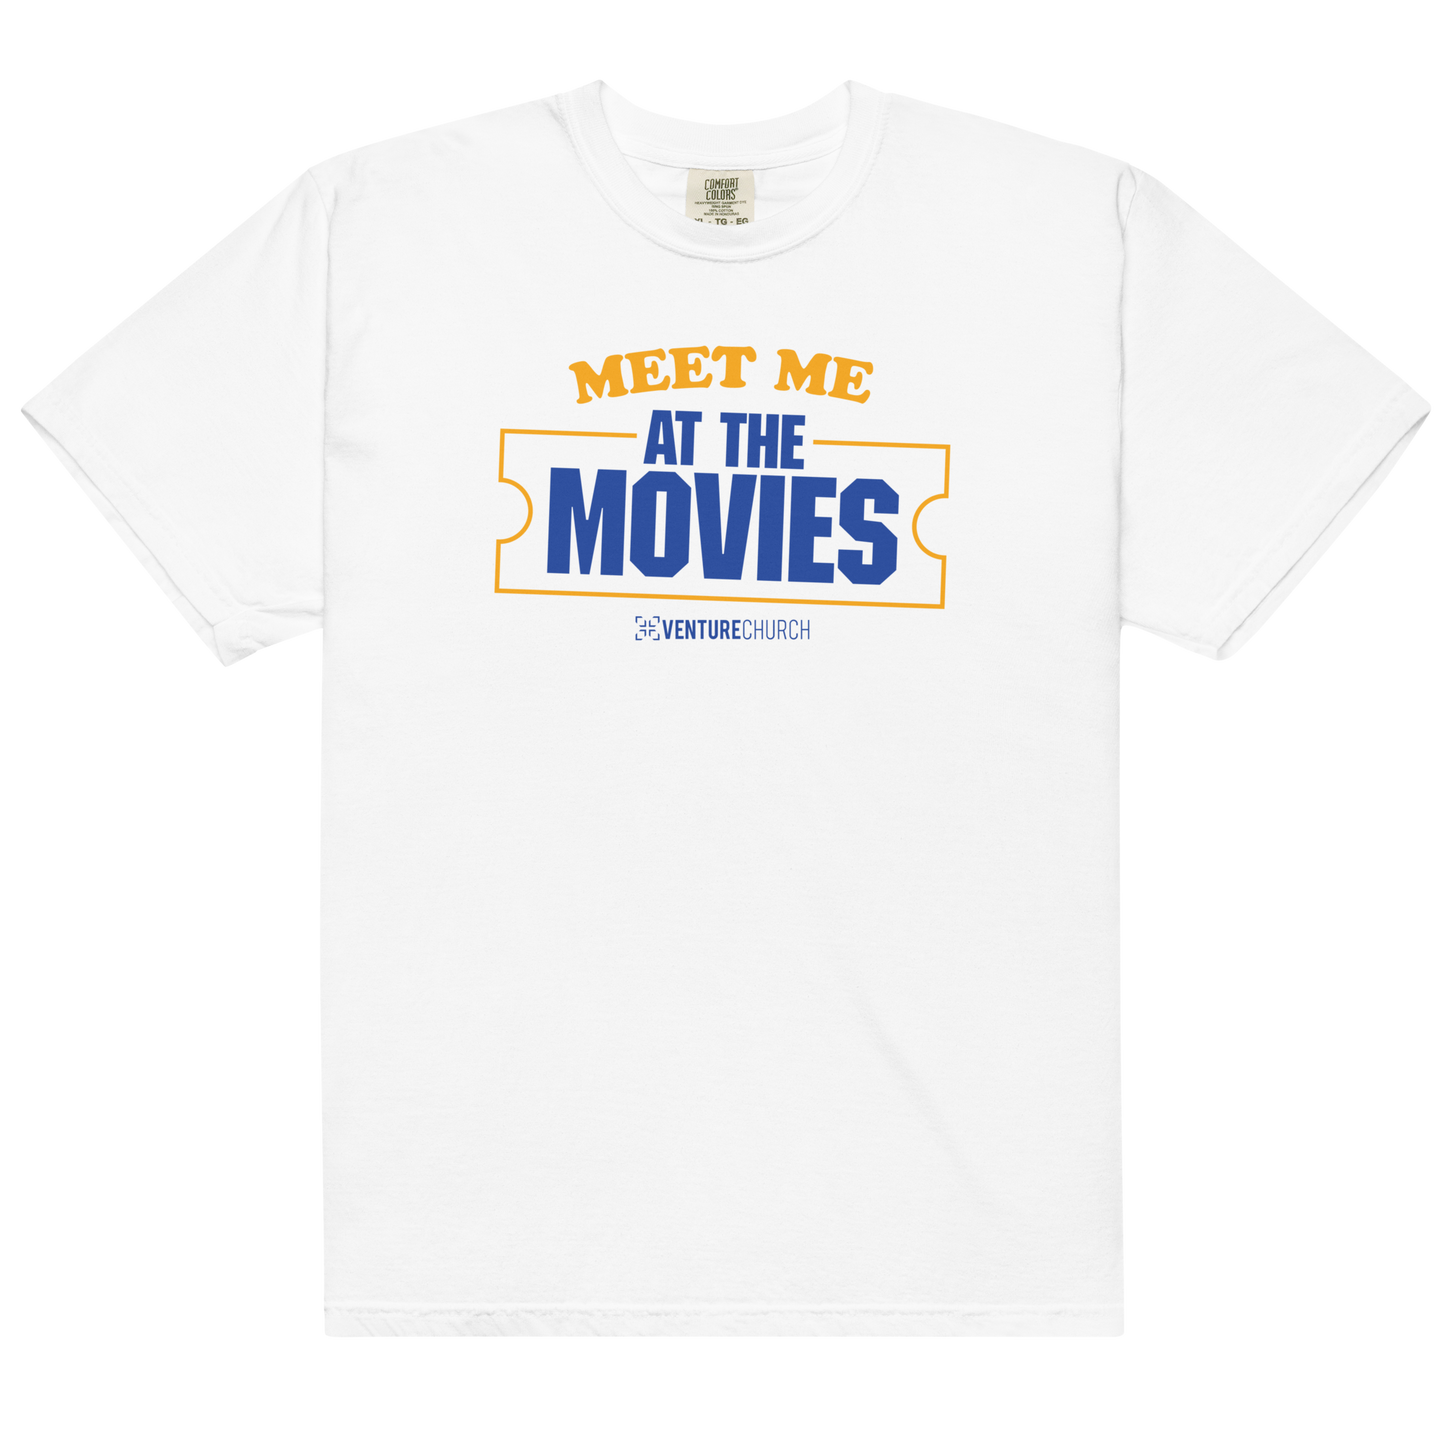 At The Movies "Meet Me At The Movies" Short-Sleeve Tee